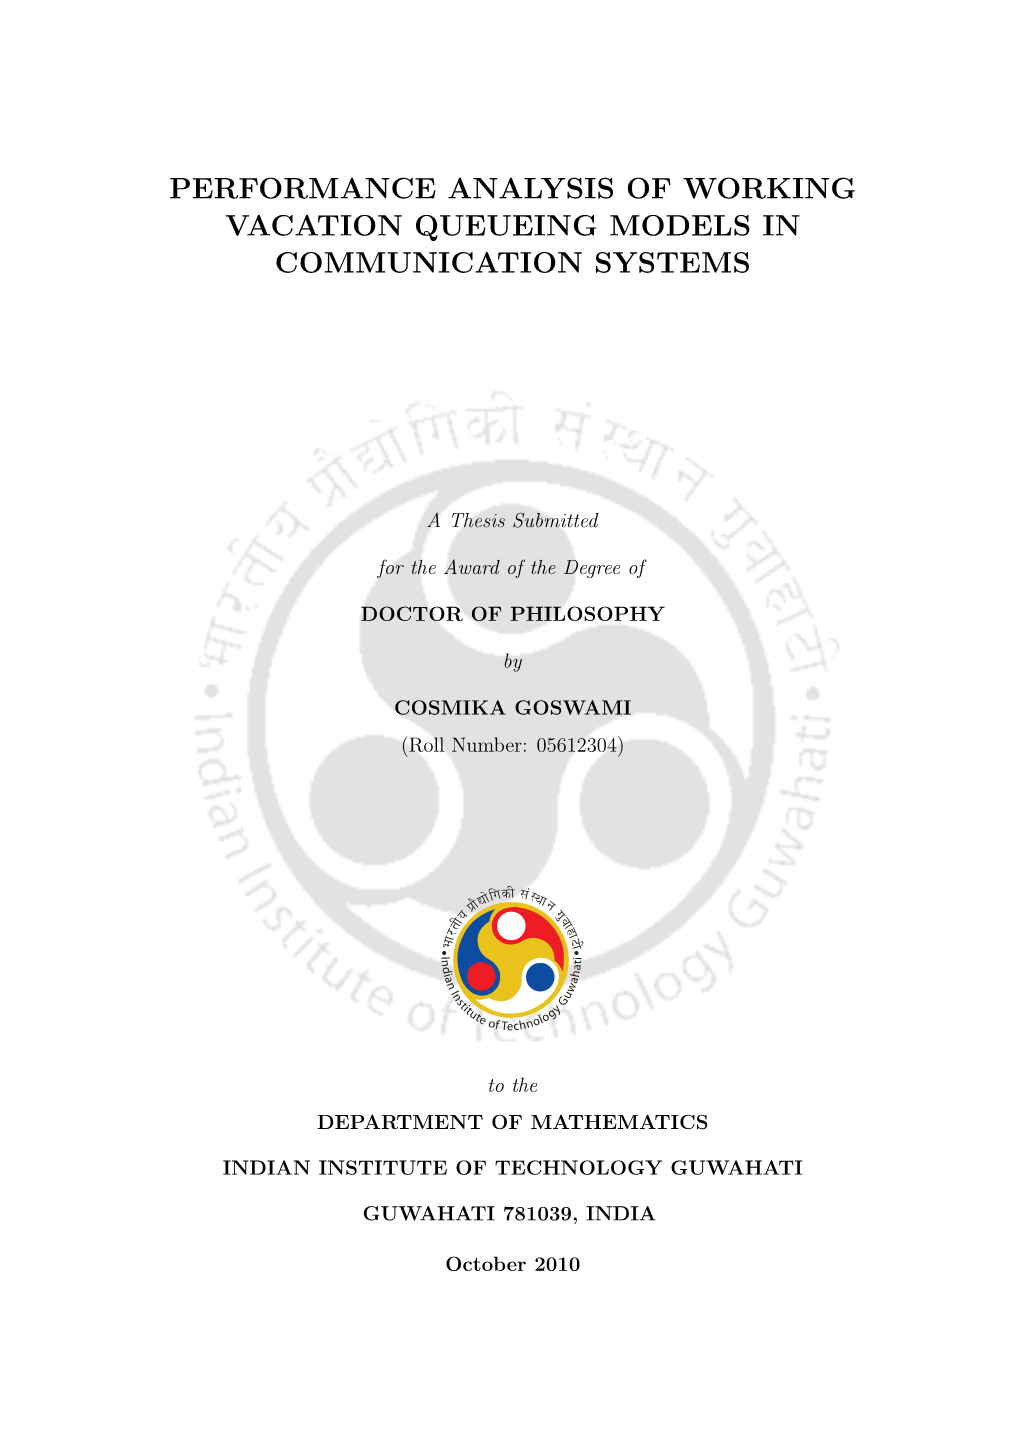 Performance Analysis of Working Vacation Queueing Models in Communication Systems